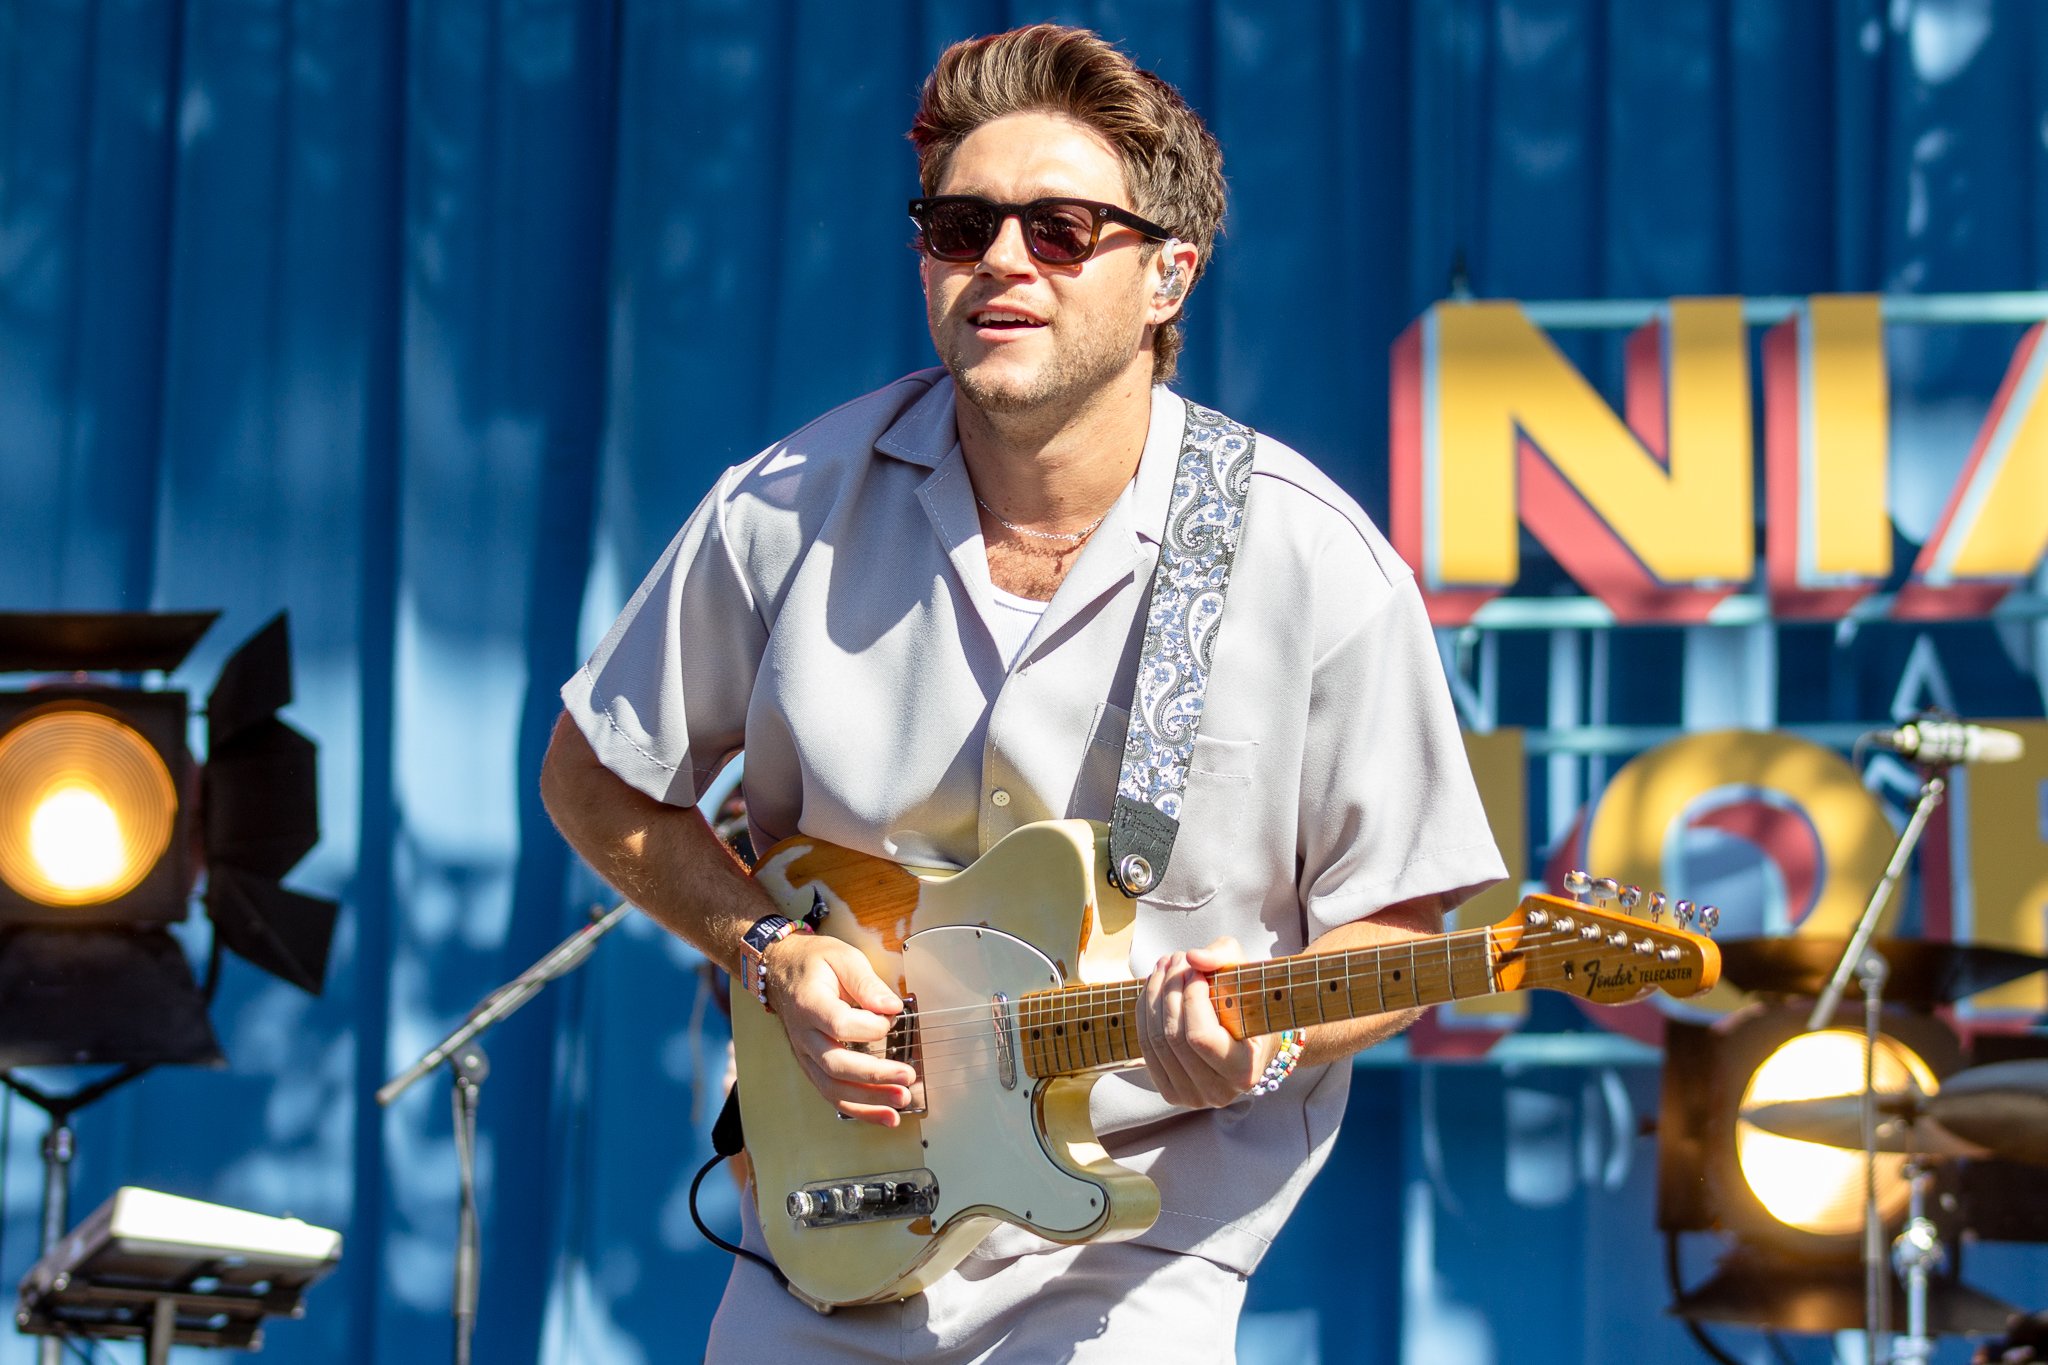  Niall Horan sings “Heaven,” a hit from his latest album,  The Show . 